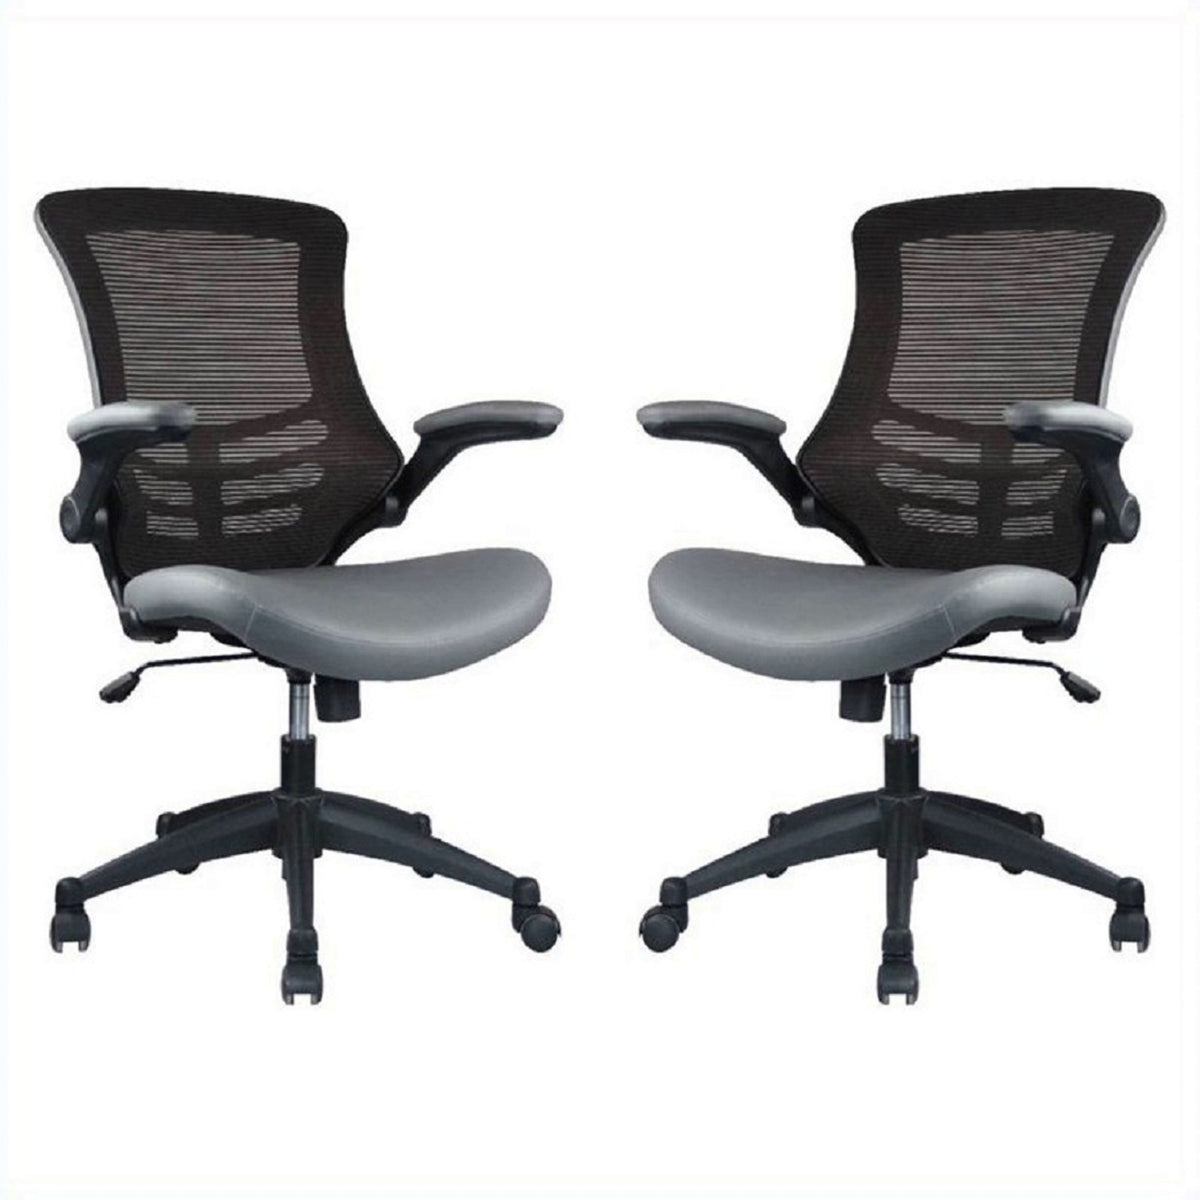 Manhattan Comfort Intrepid High-back Office Chair in Coffee and Grey - Set of 2-Minimal & Modern